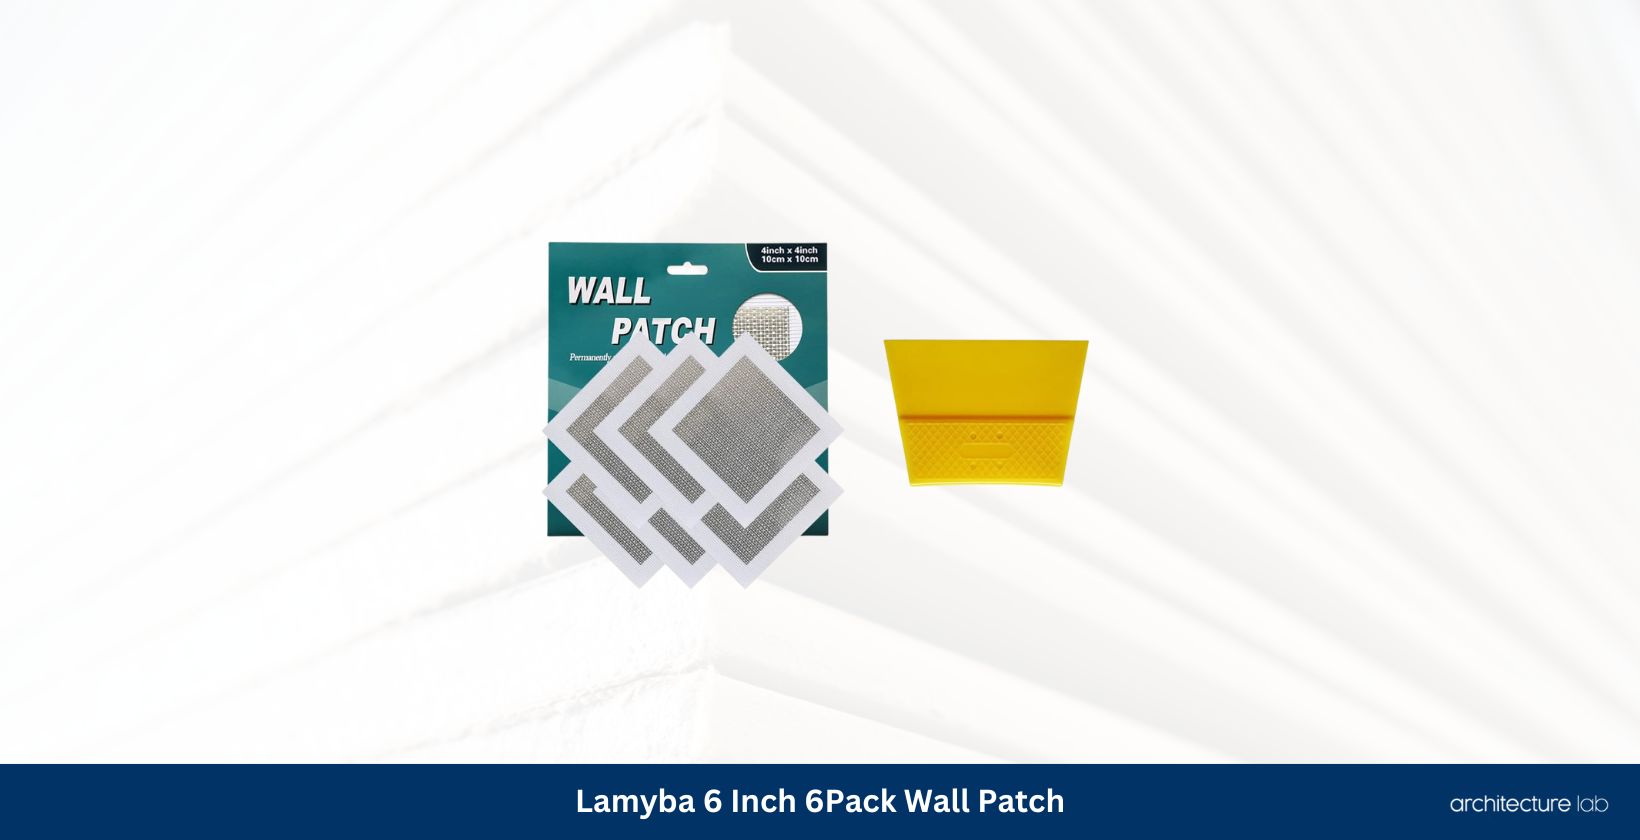 Lamyba 6 inch 6pack wall patch